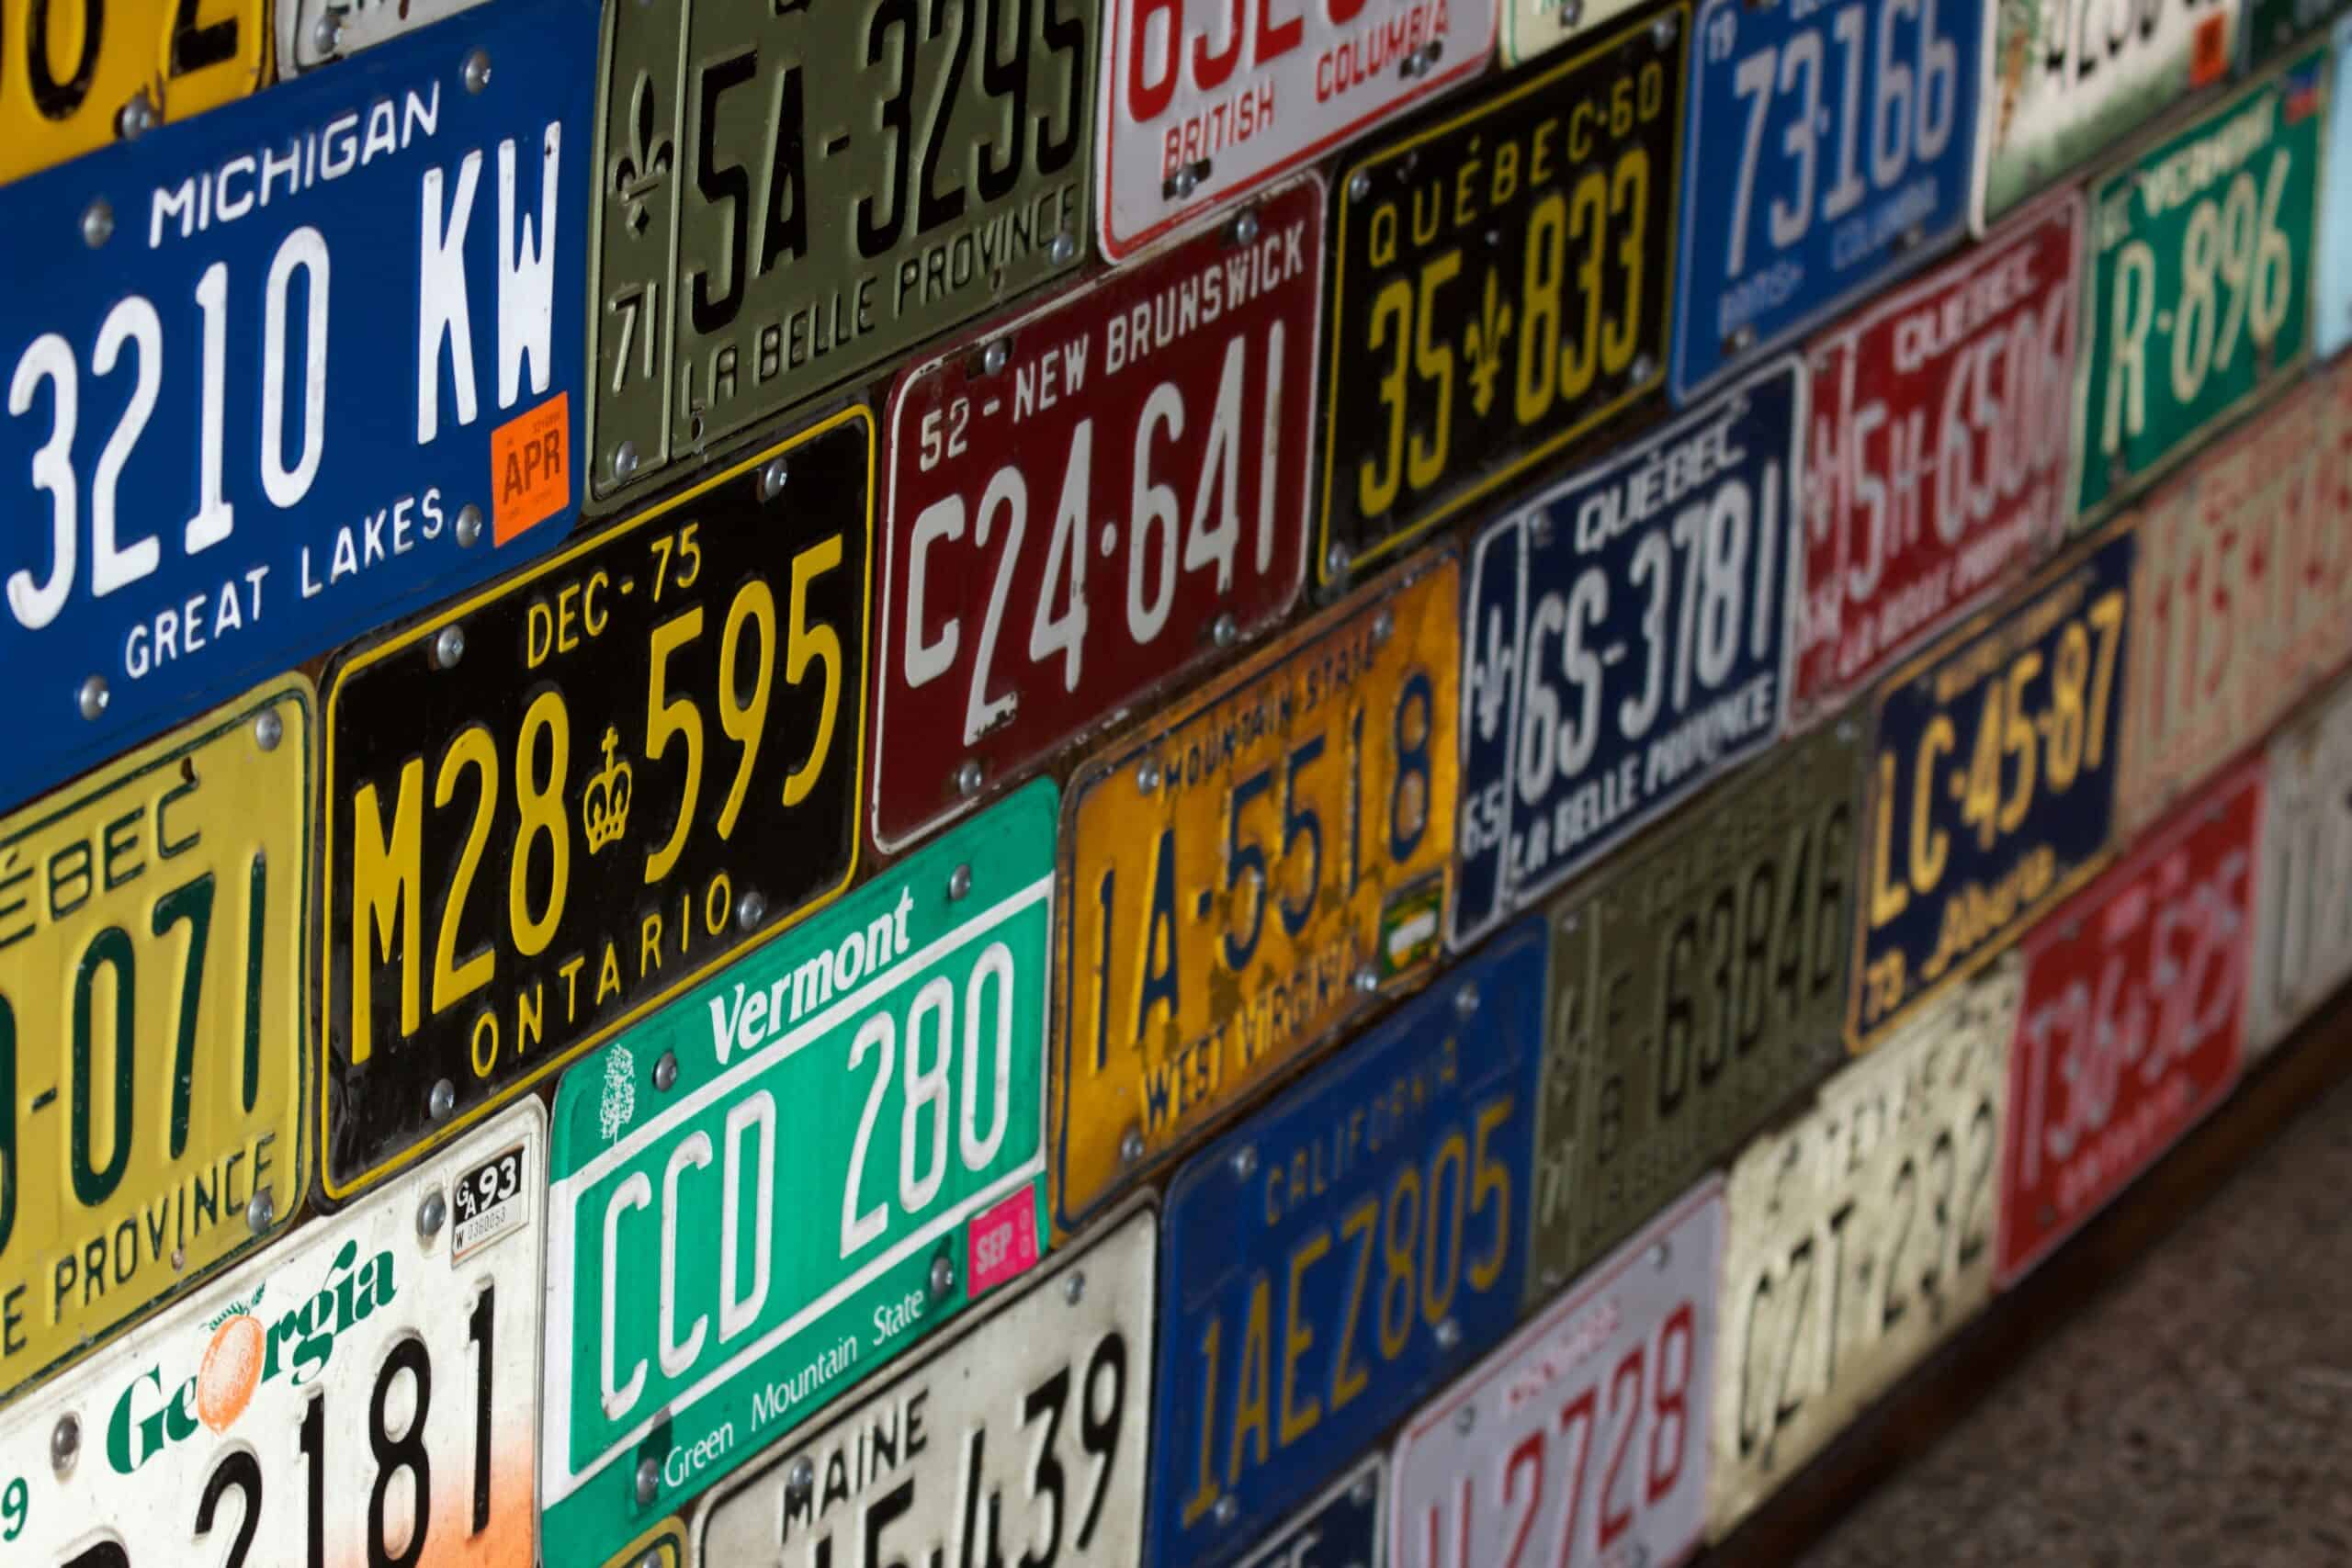 Vehicle Tags and Registrations